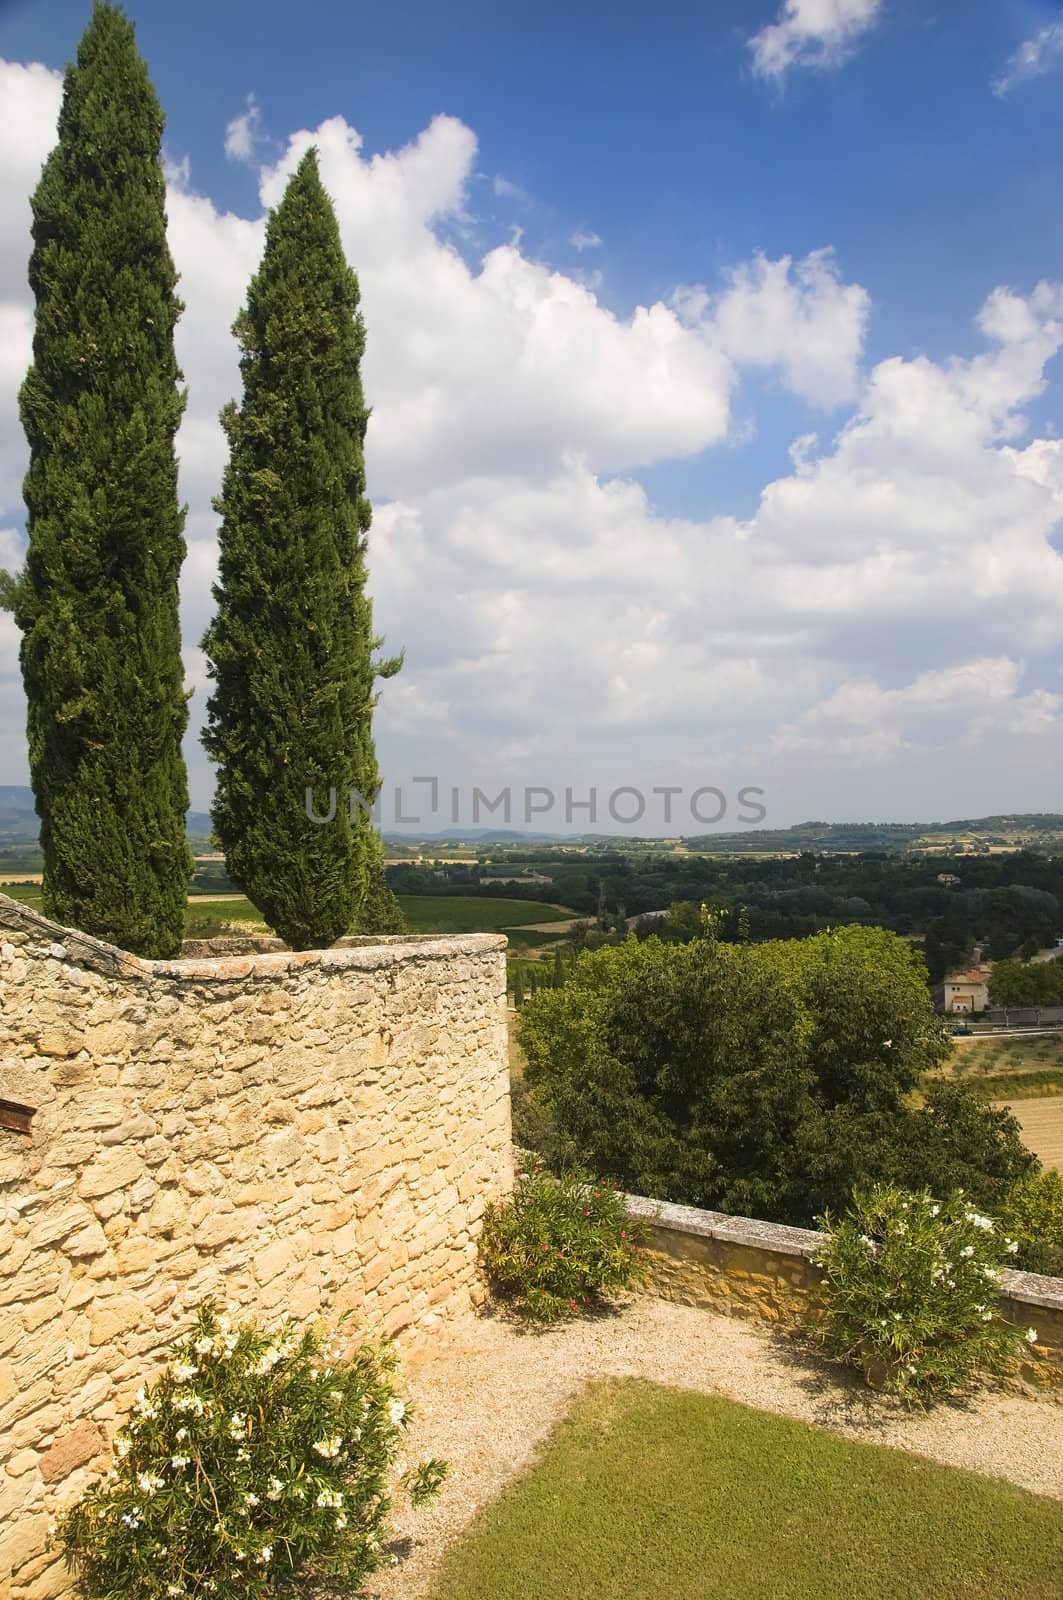 landscape with cypress trees in the region of Luberon, Provence, France